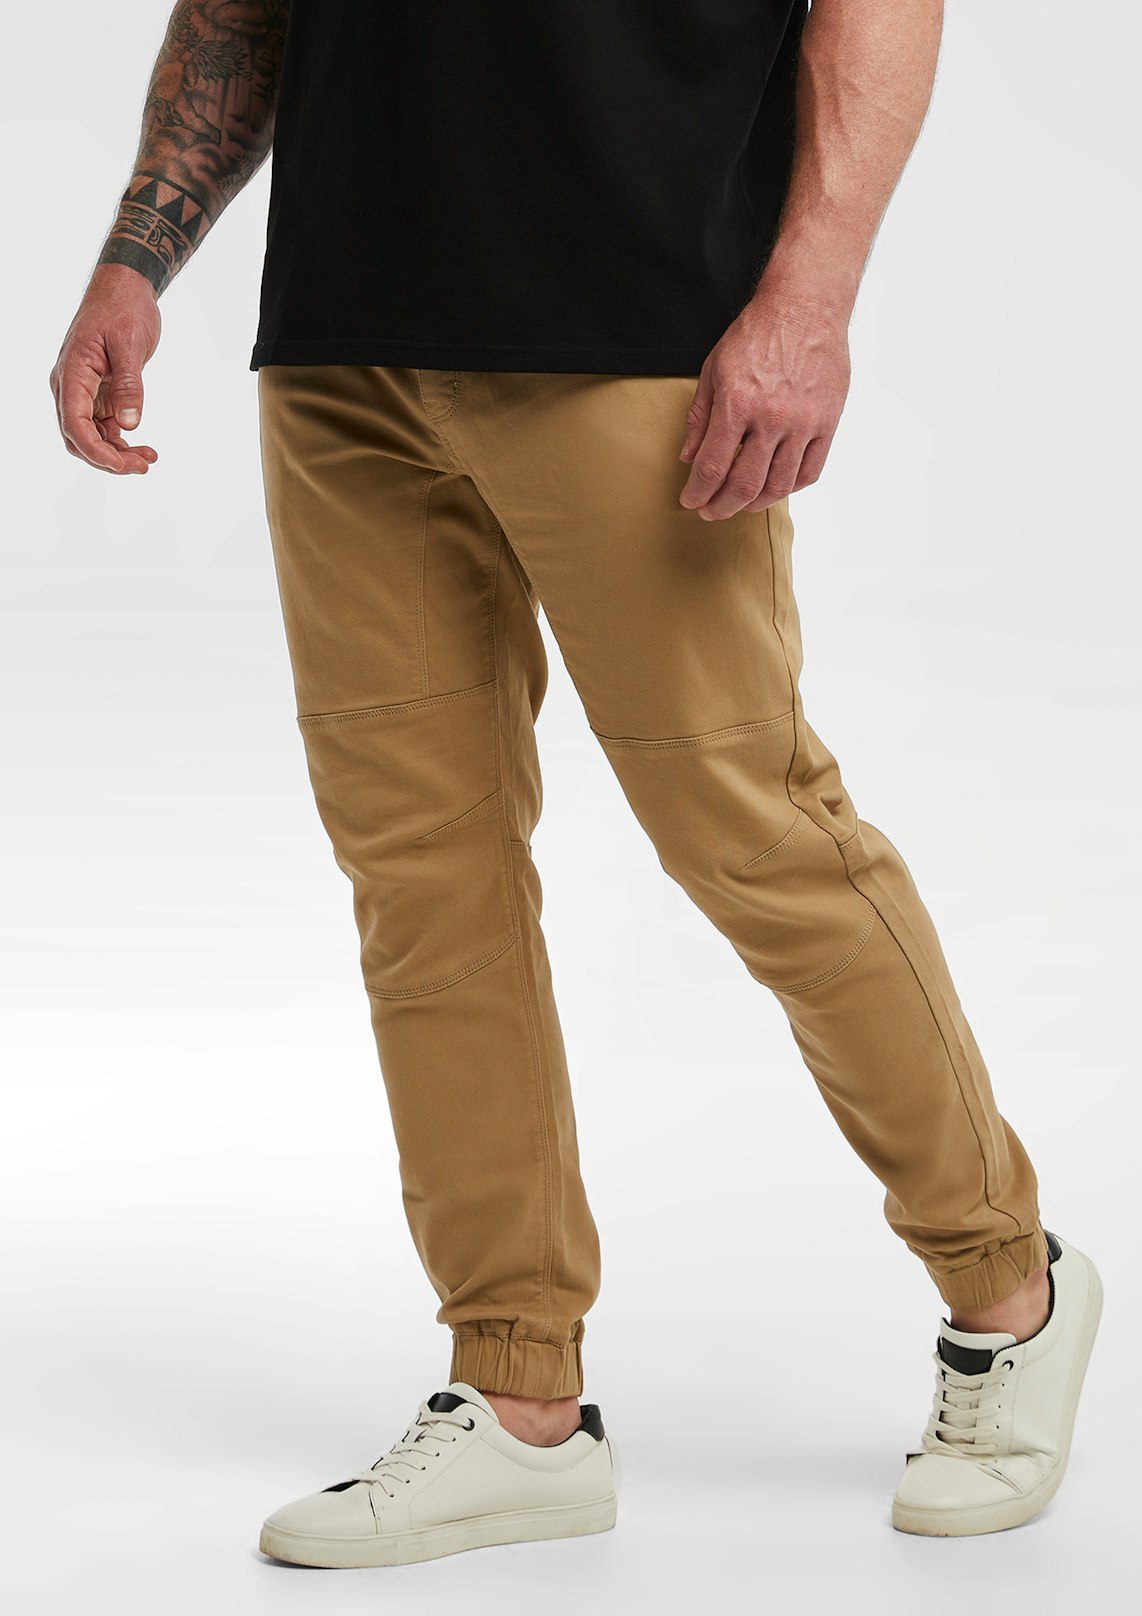 Shop Cargo Pants, 365 Day Hassle Free Returns